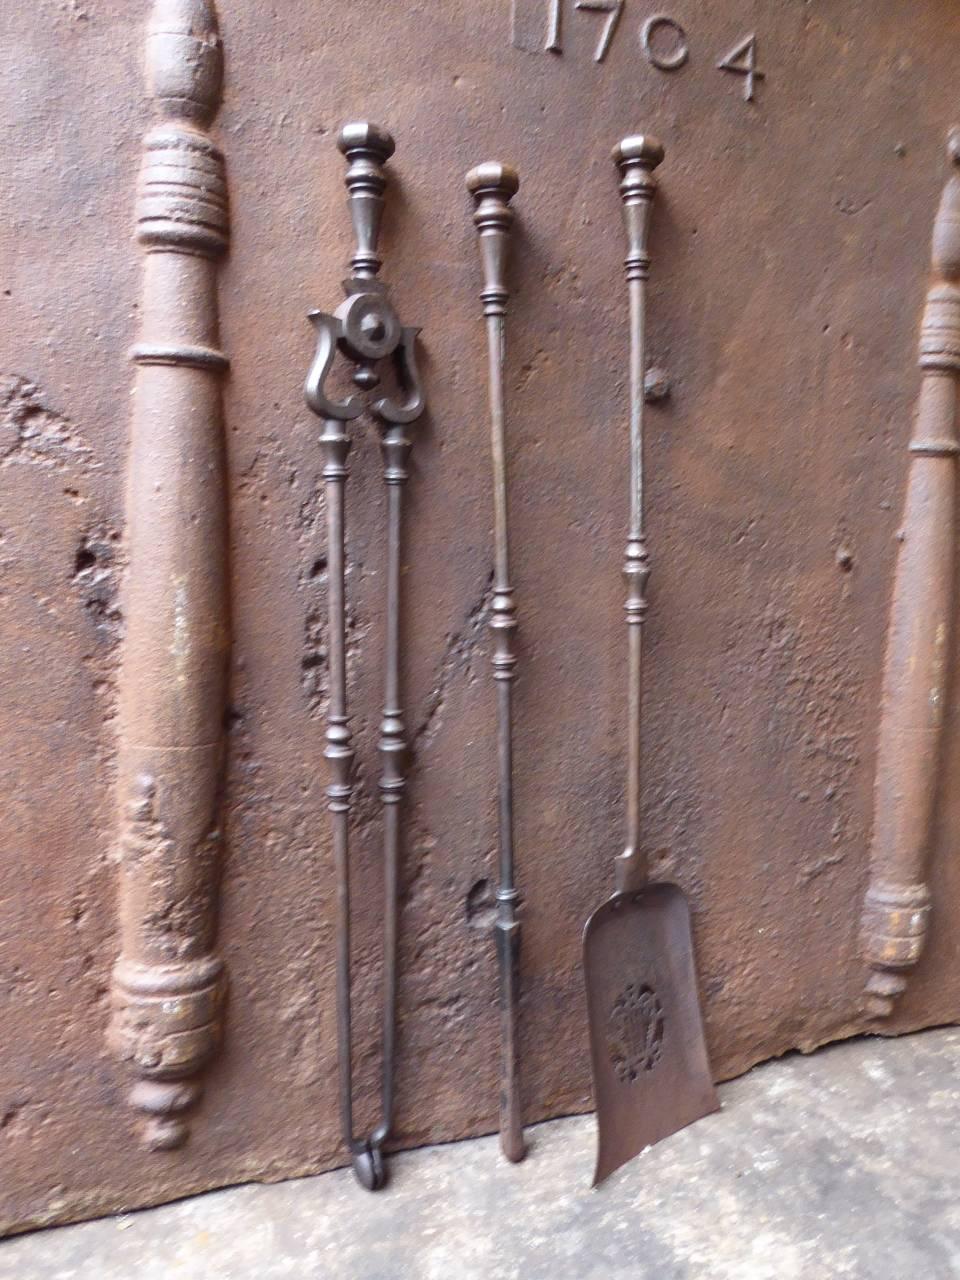 19th century English fireplace tool set, fire irons made of wrought iron.

We have a unique and specialized collection of antique and used fireplace accessories consisting of more than 1000 listings at 1stdibs. Amongst others, we always have 300+